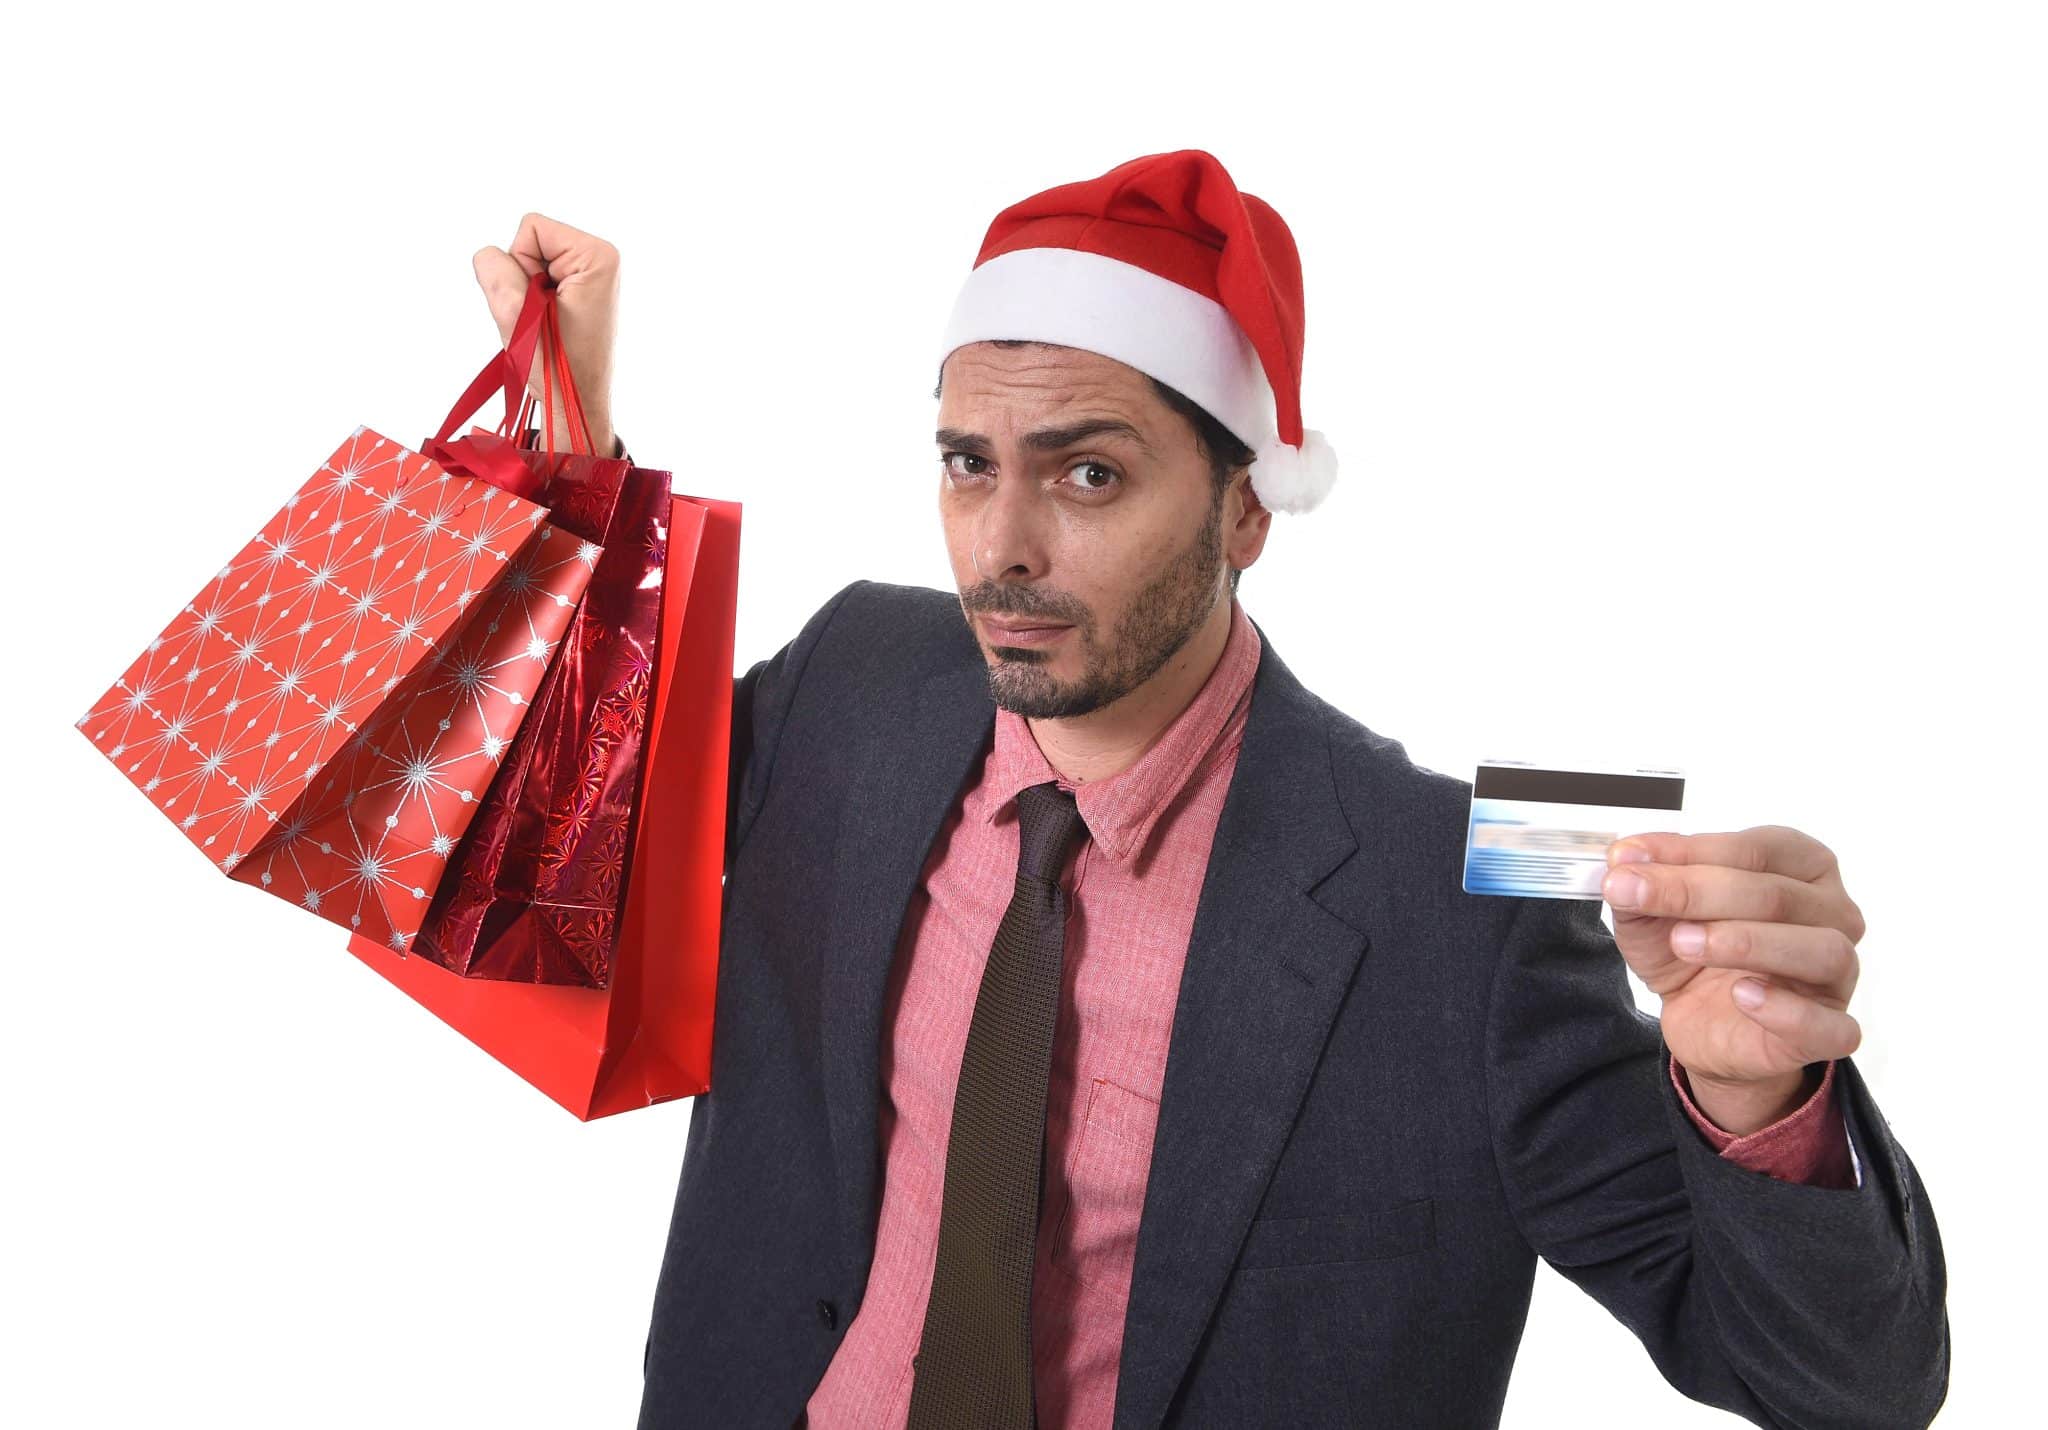 415,000 men in Georgia will wait until Christmas Eve to do their holiday shopping